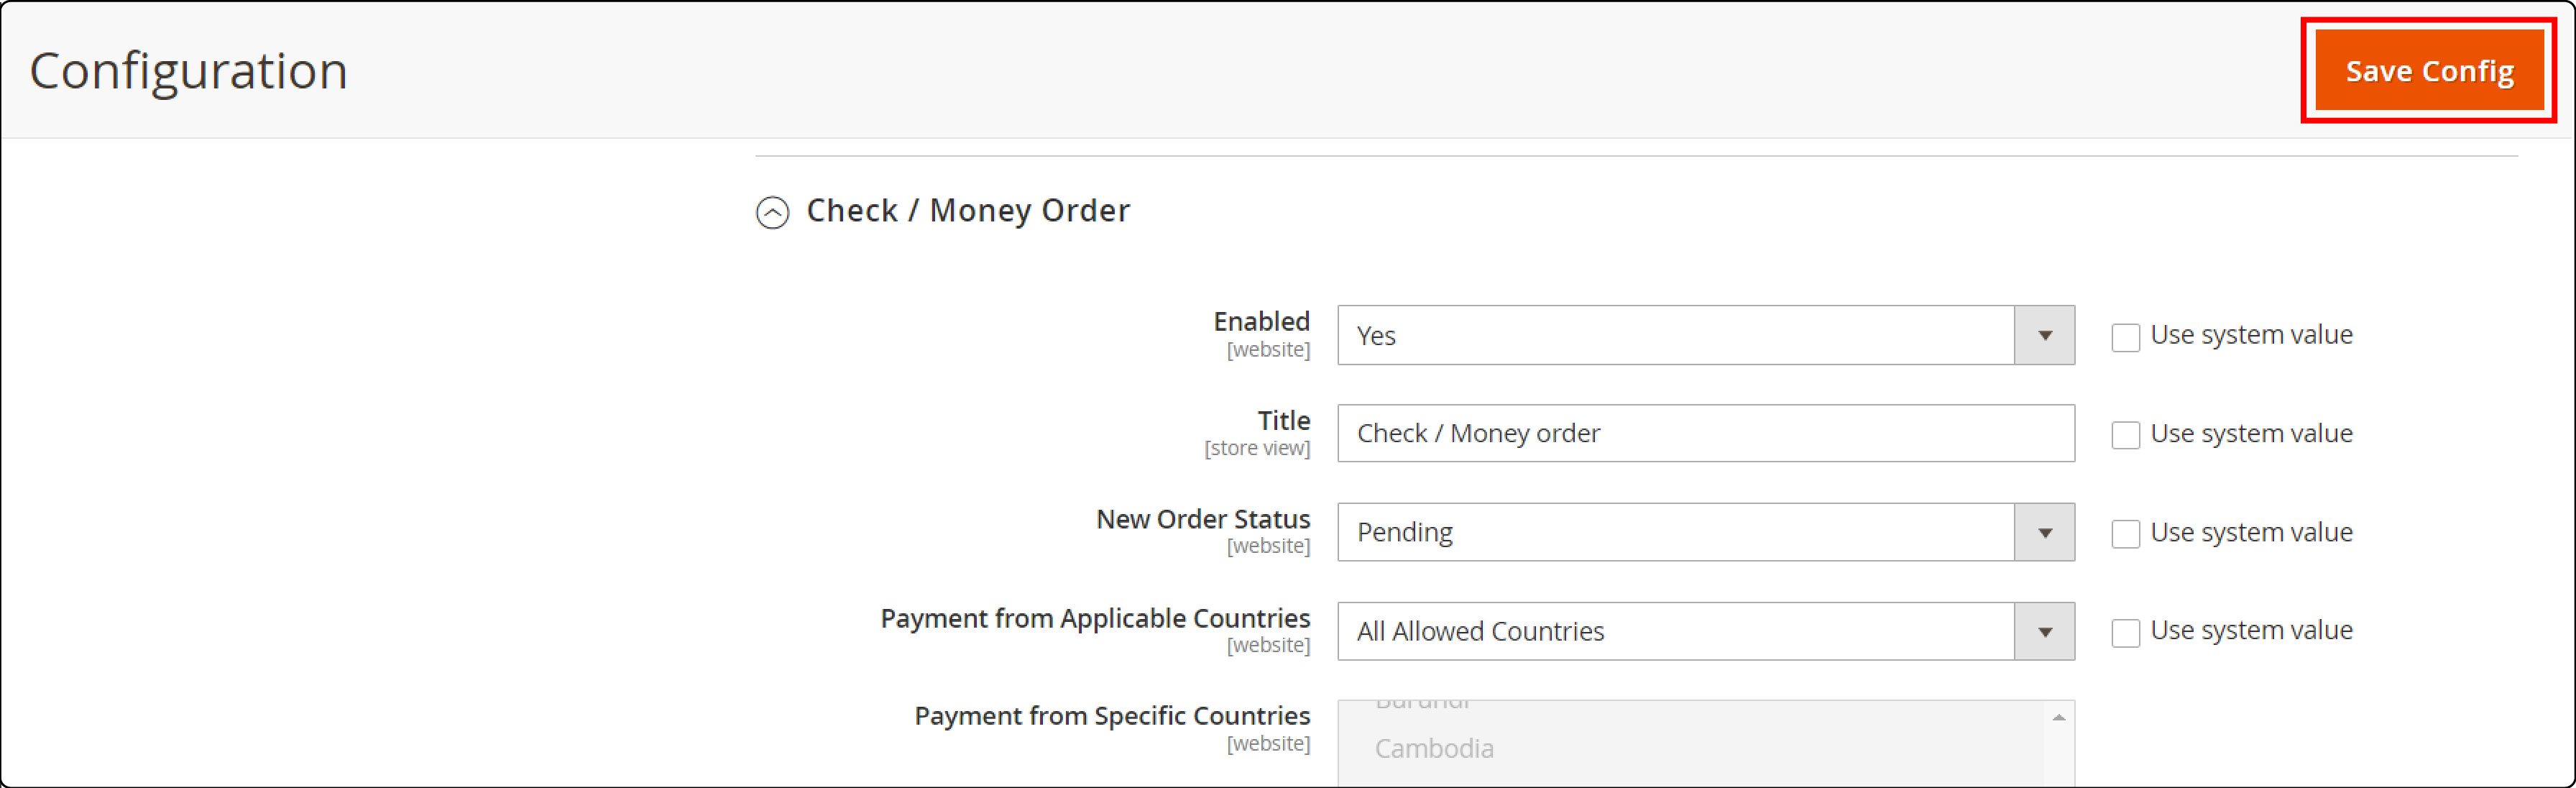 Saving Settings in Magento 2 Add Payment Method